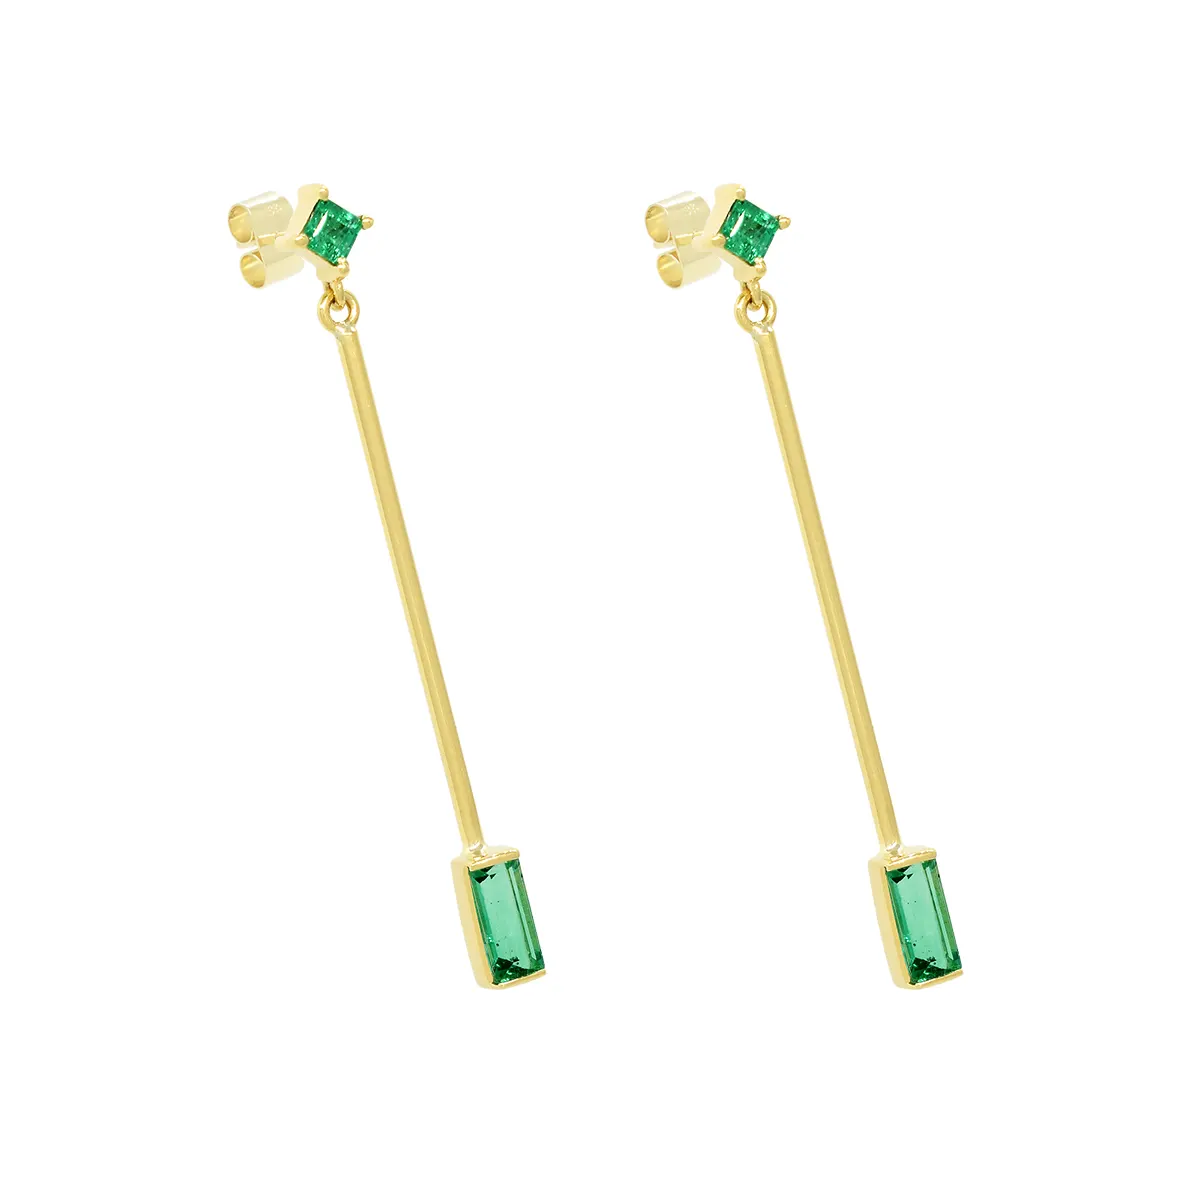 Emerald and baguette cut natural Colombian emeralds set in thin dangling earrings custom made in a fine drop style set of earrings